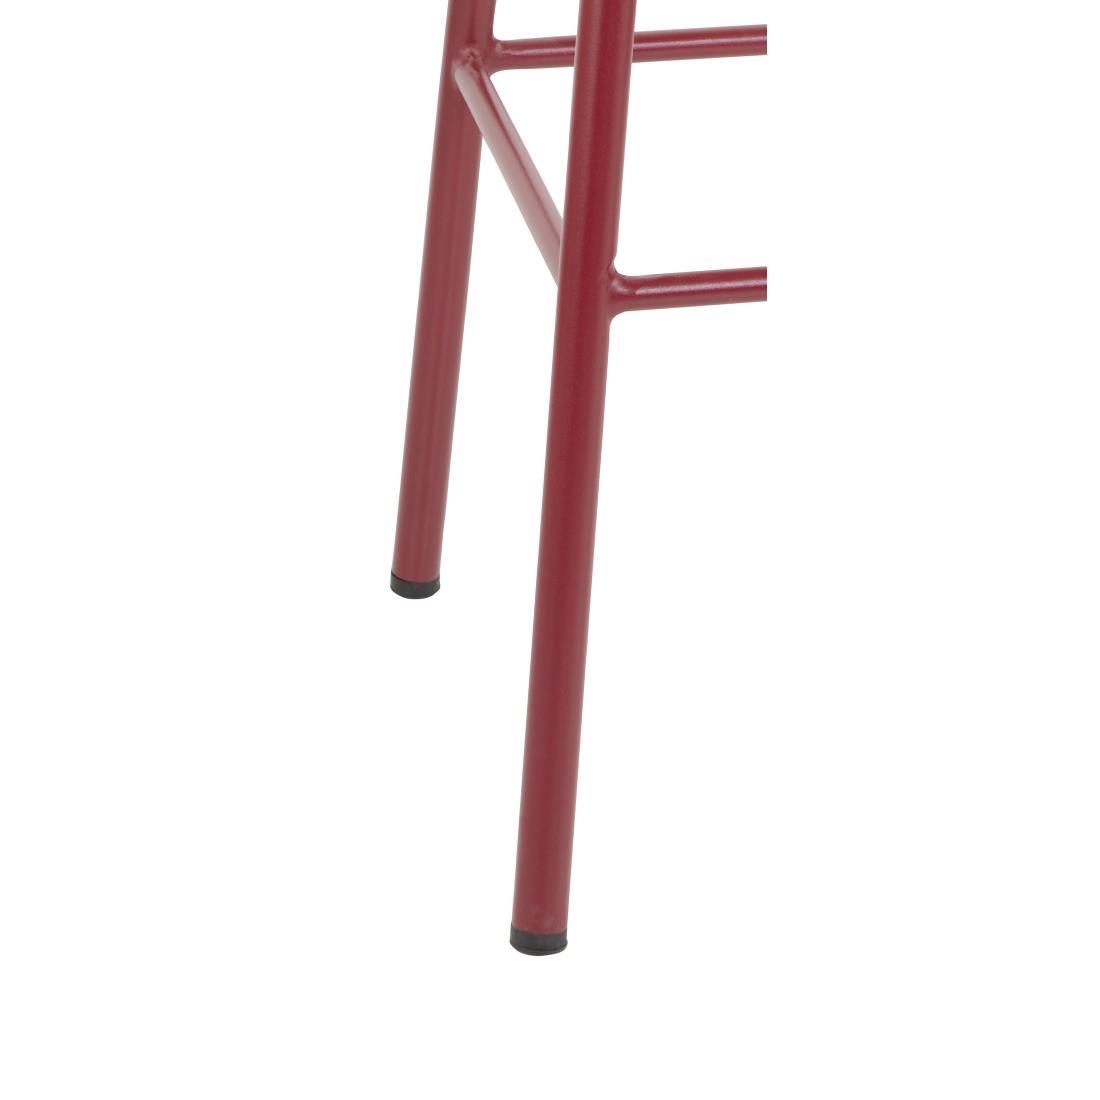 Bolero Cantina High Stools with Wooden Seat Pad Wine Red (Pack of 4) - FB937  - 3